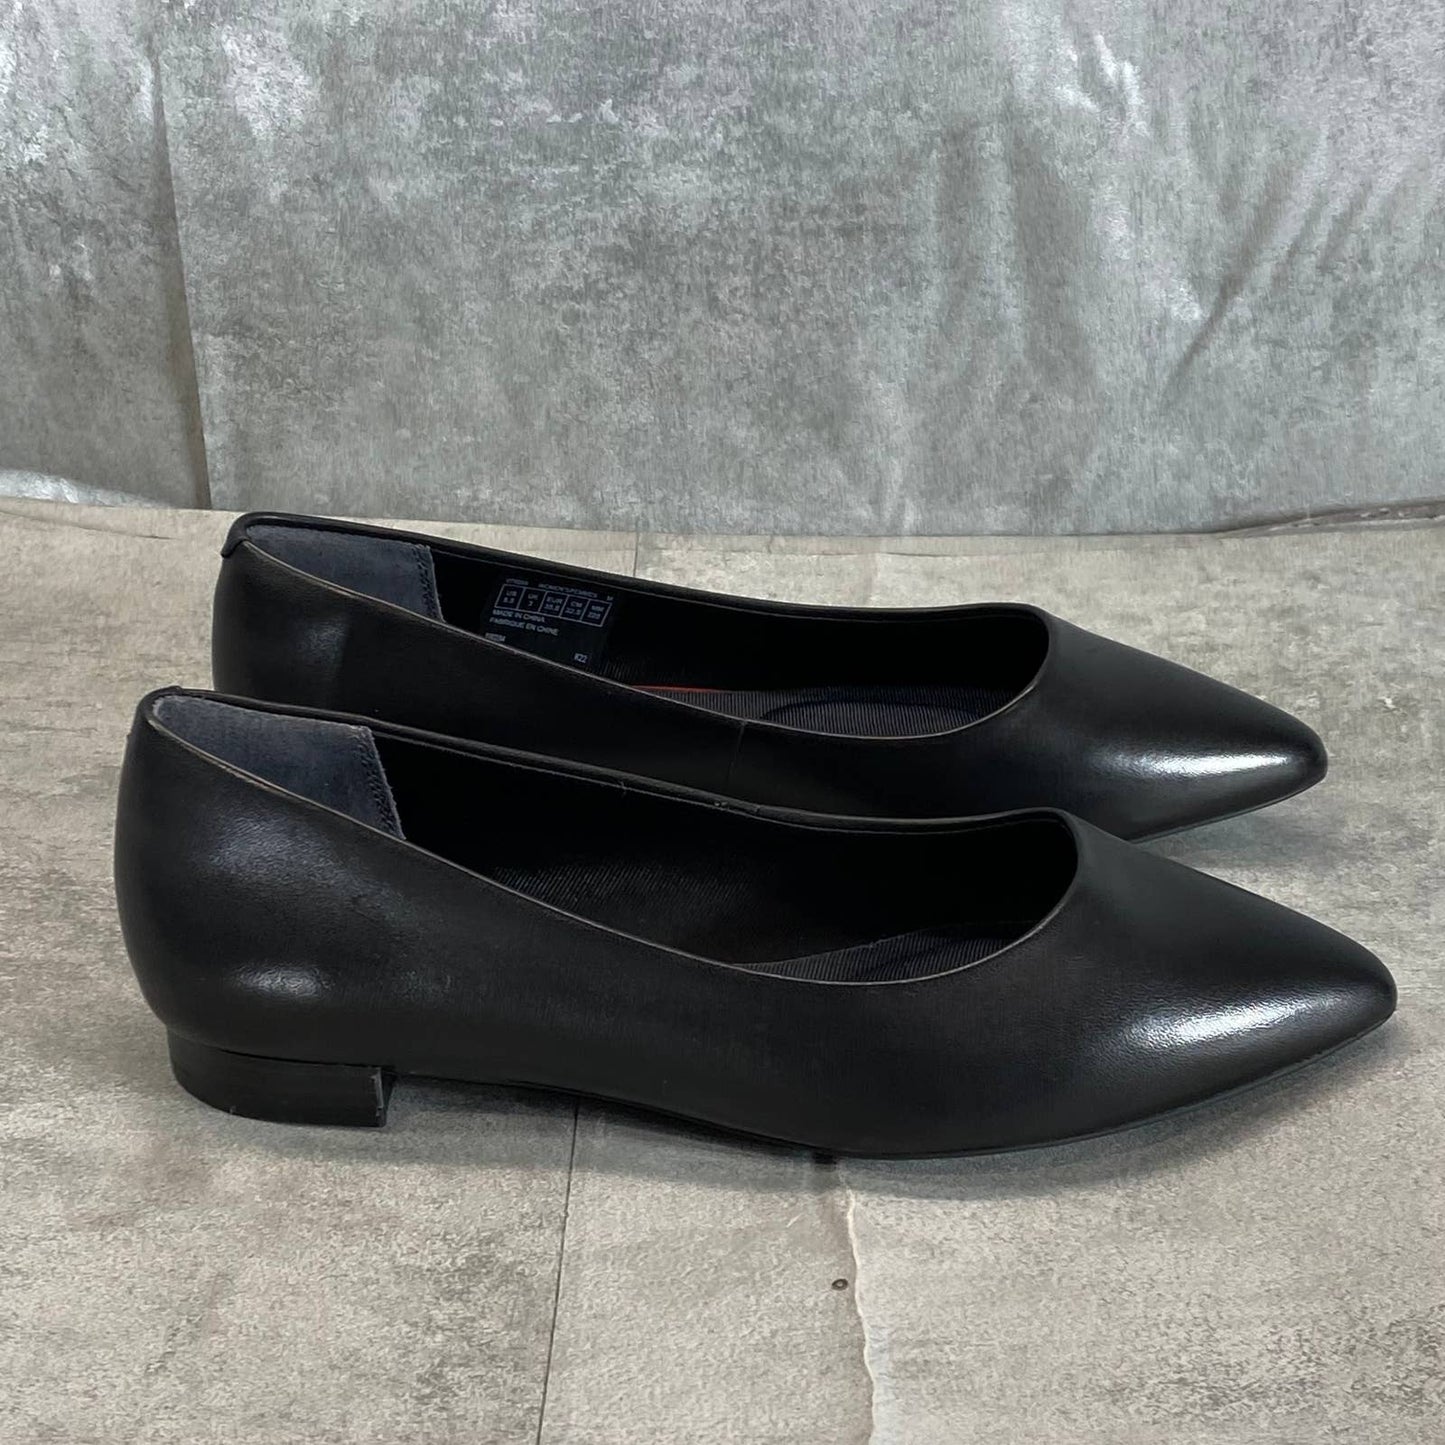 ROCKPORT Women's Black Leather Adelyn Total Motion Pointed-Toe Ballet Flat SZ5.5